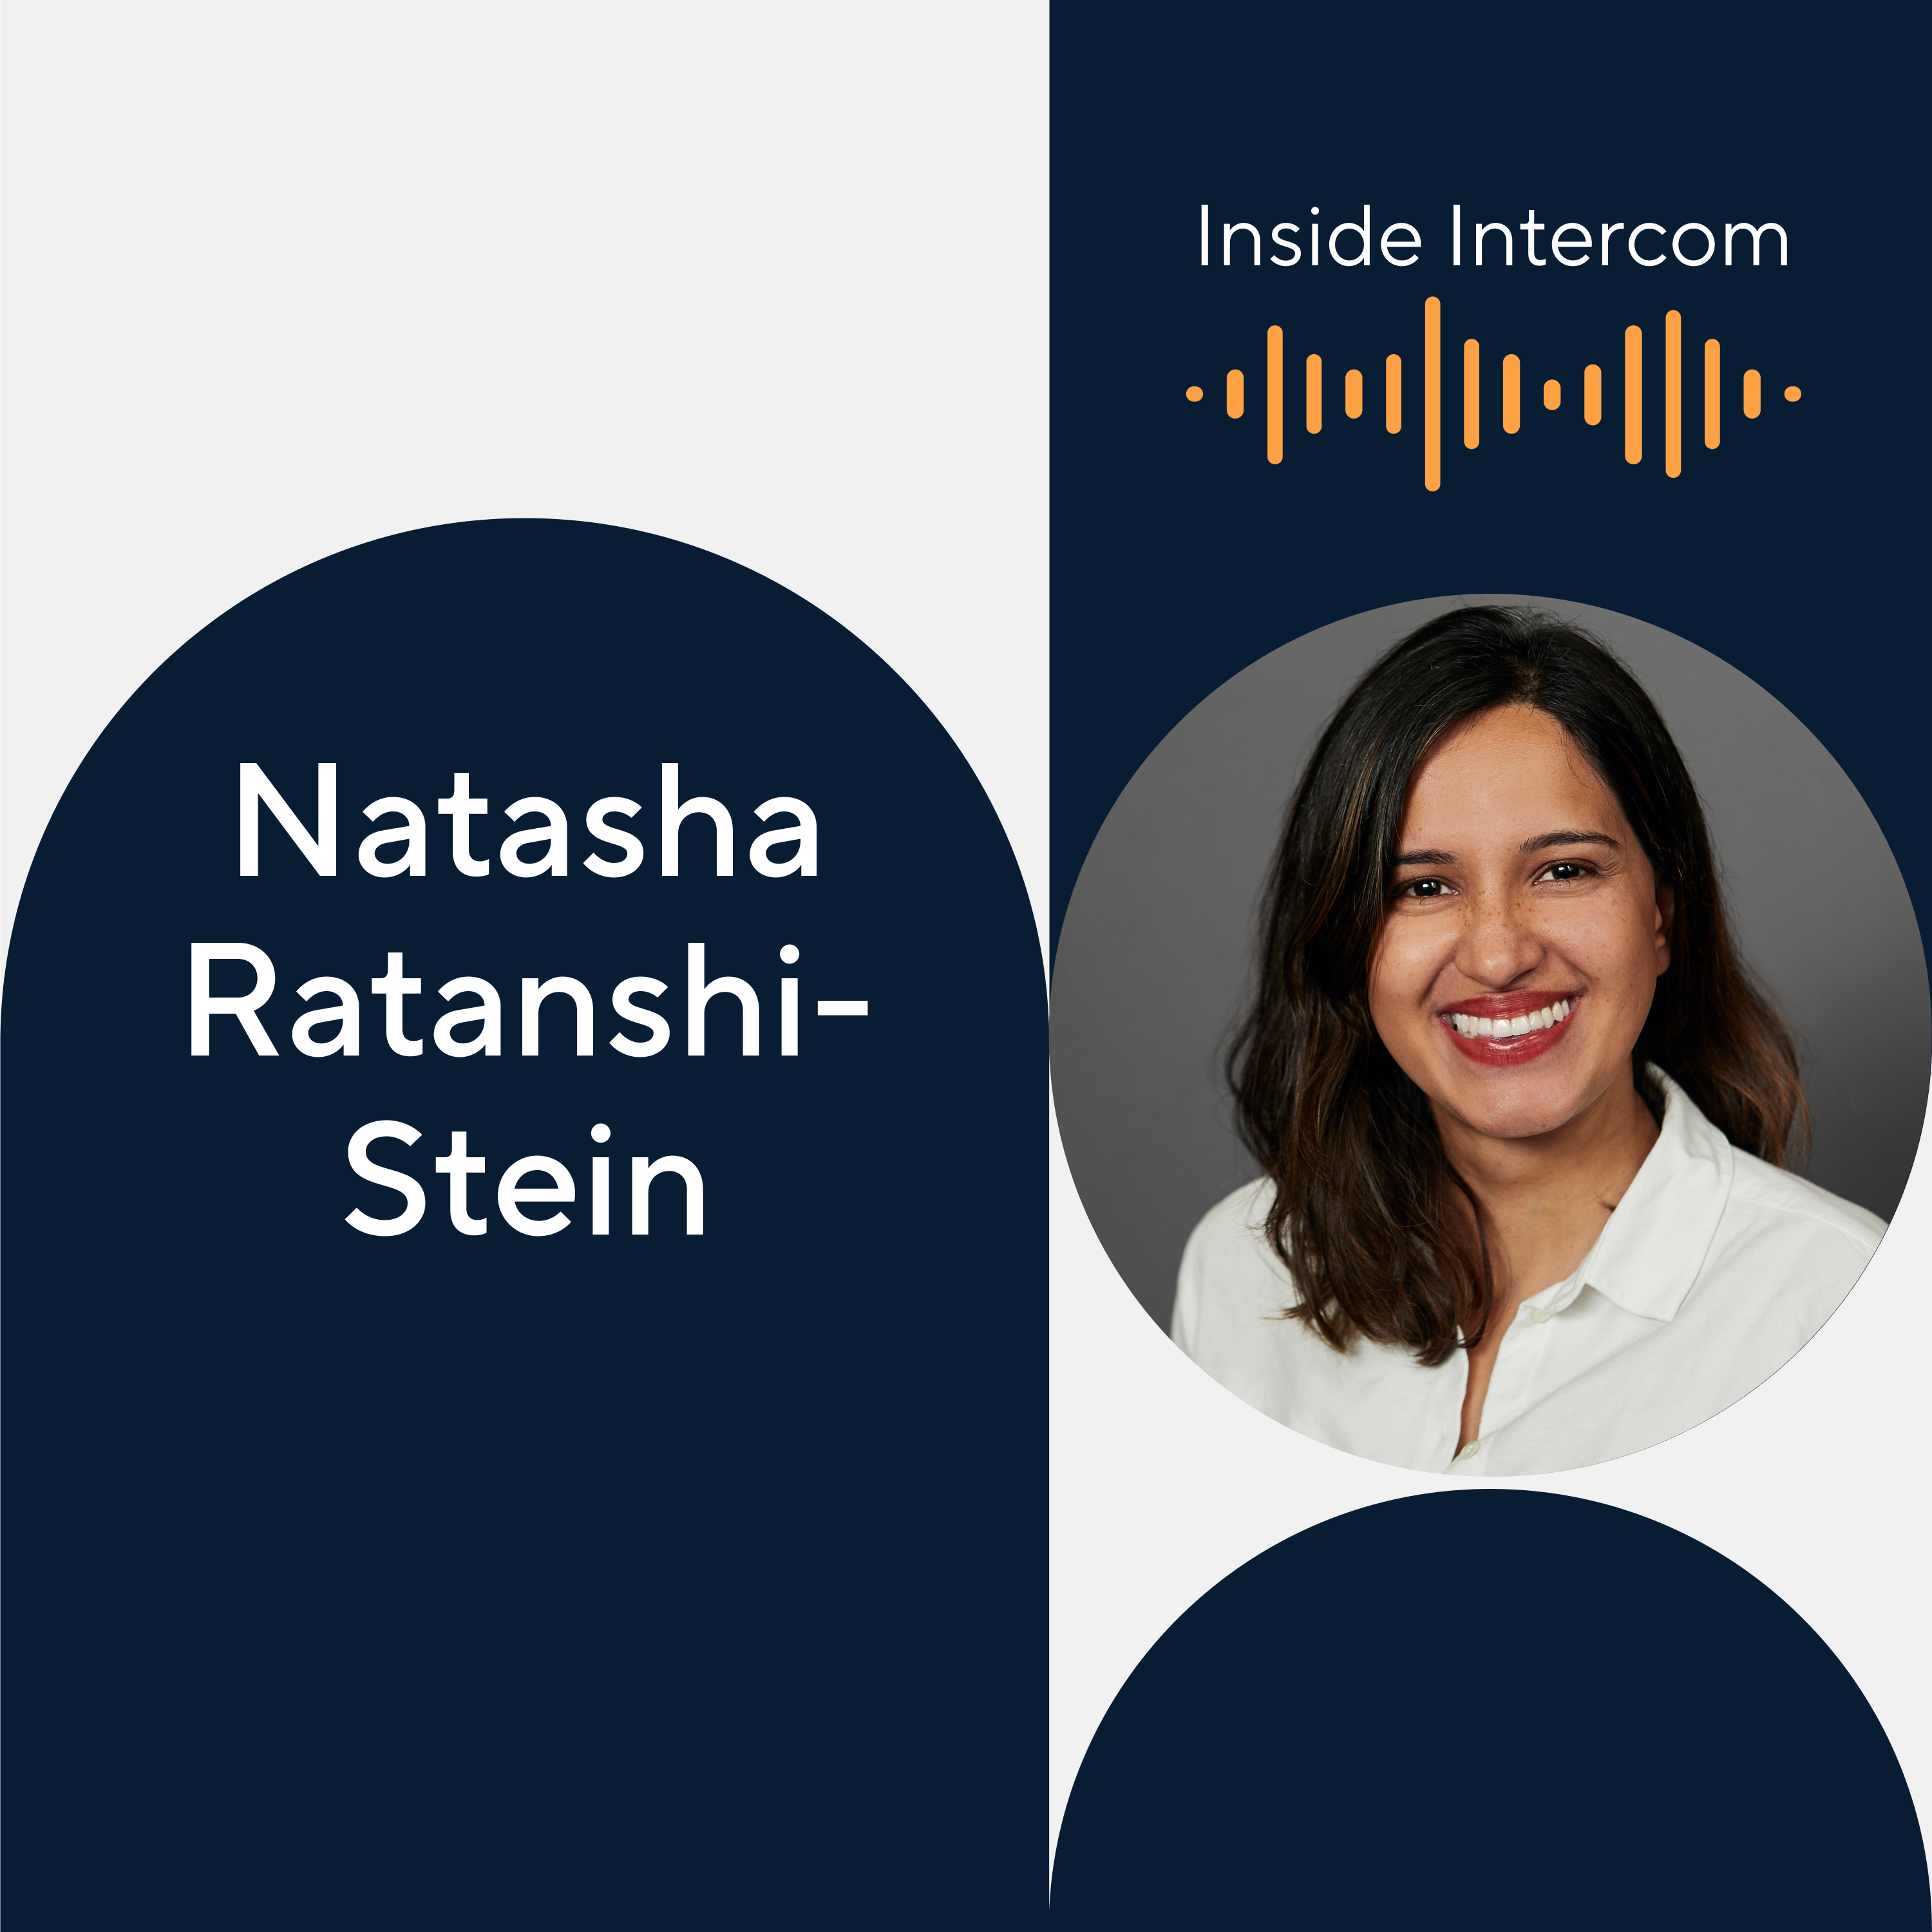 Surfboard founder Natasha Ratanshi-Stein on riding the wave of planning software for support